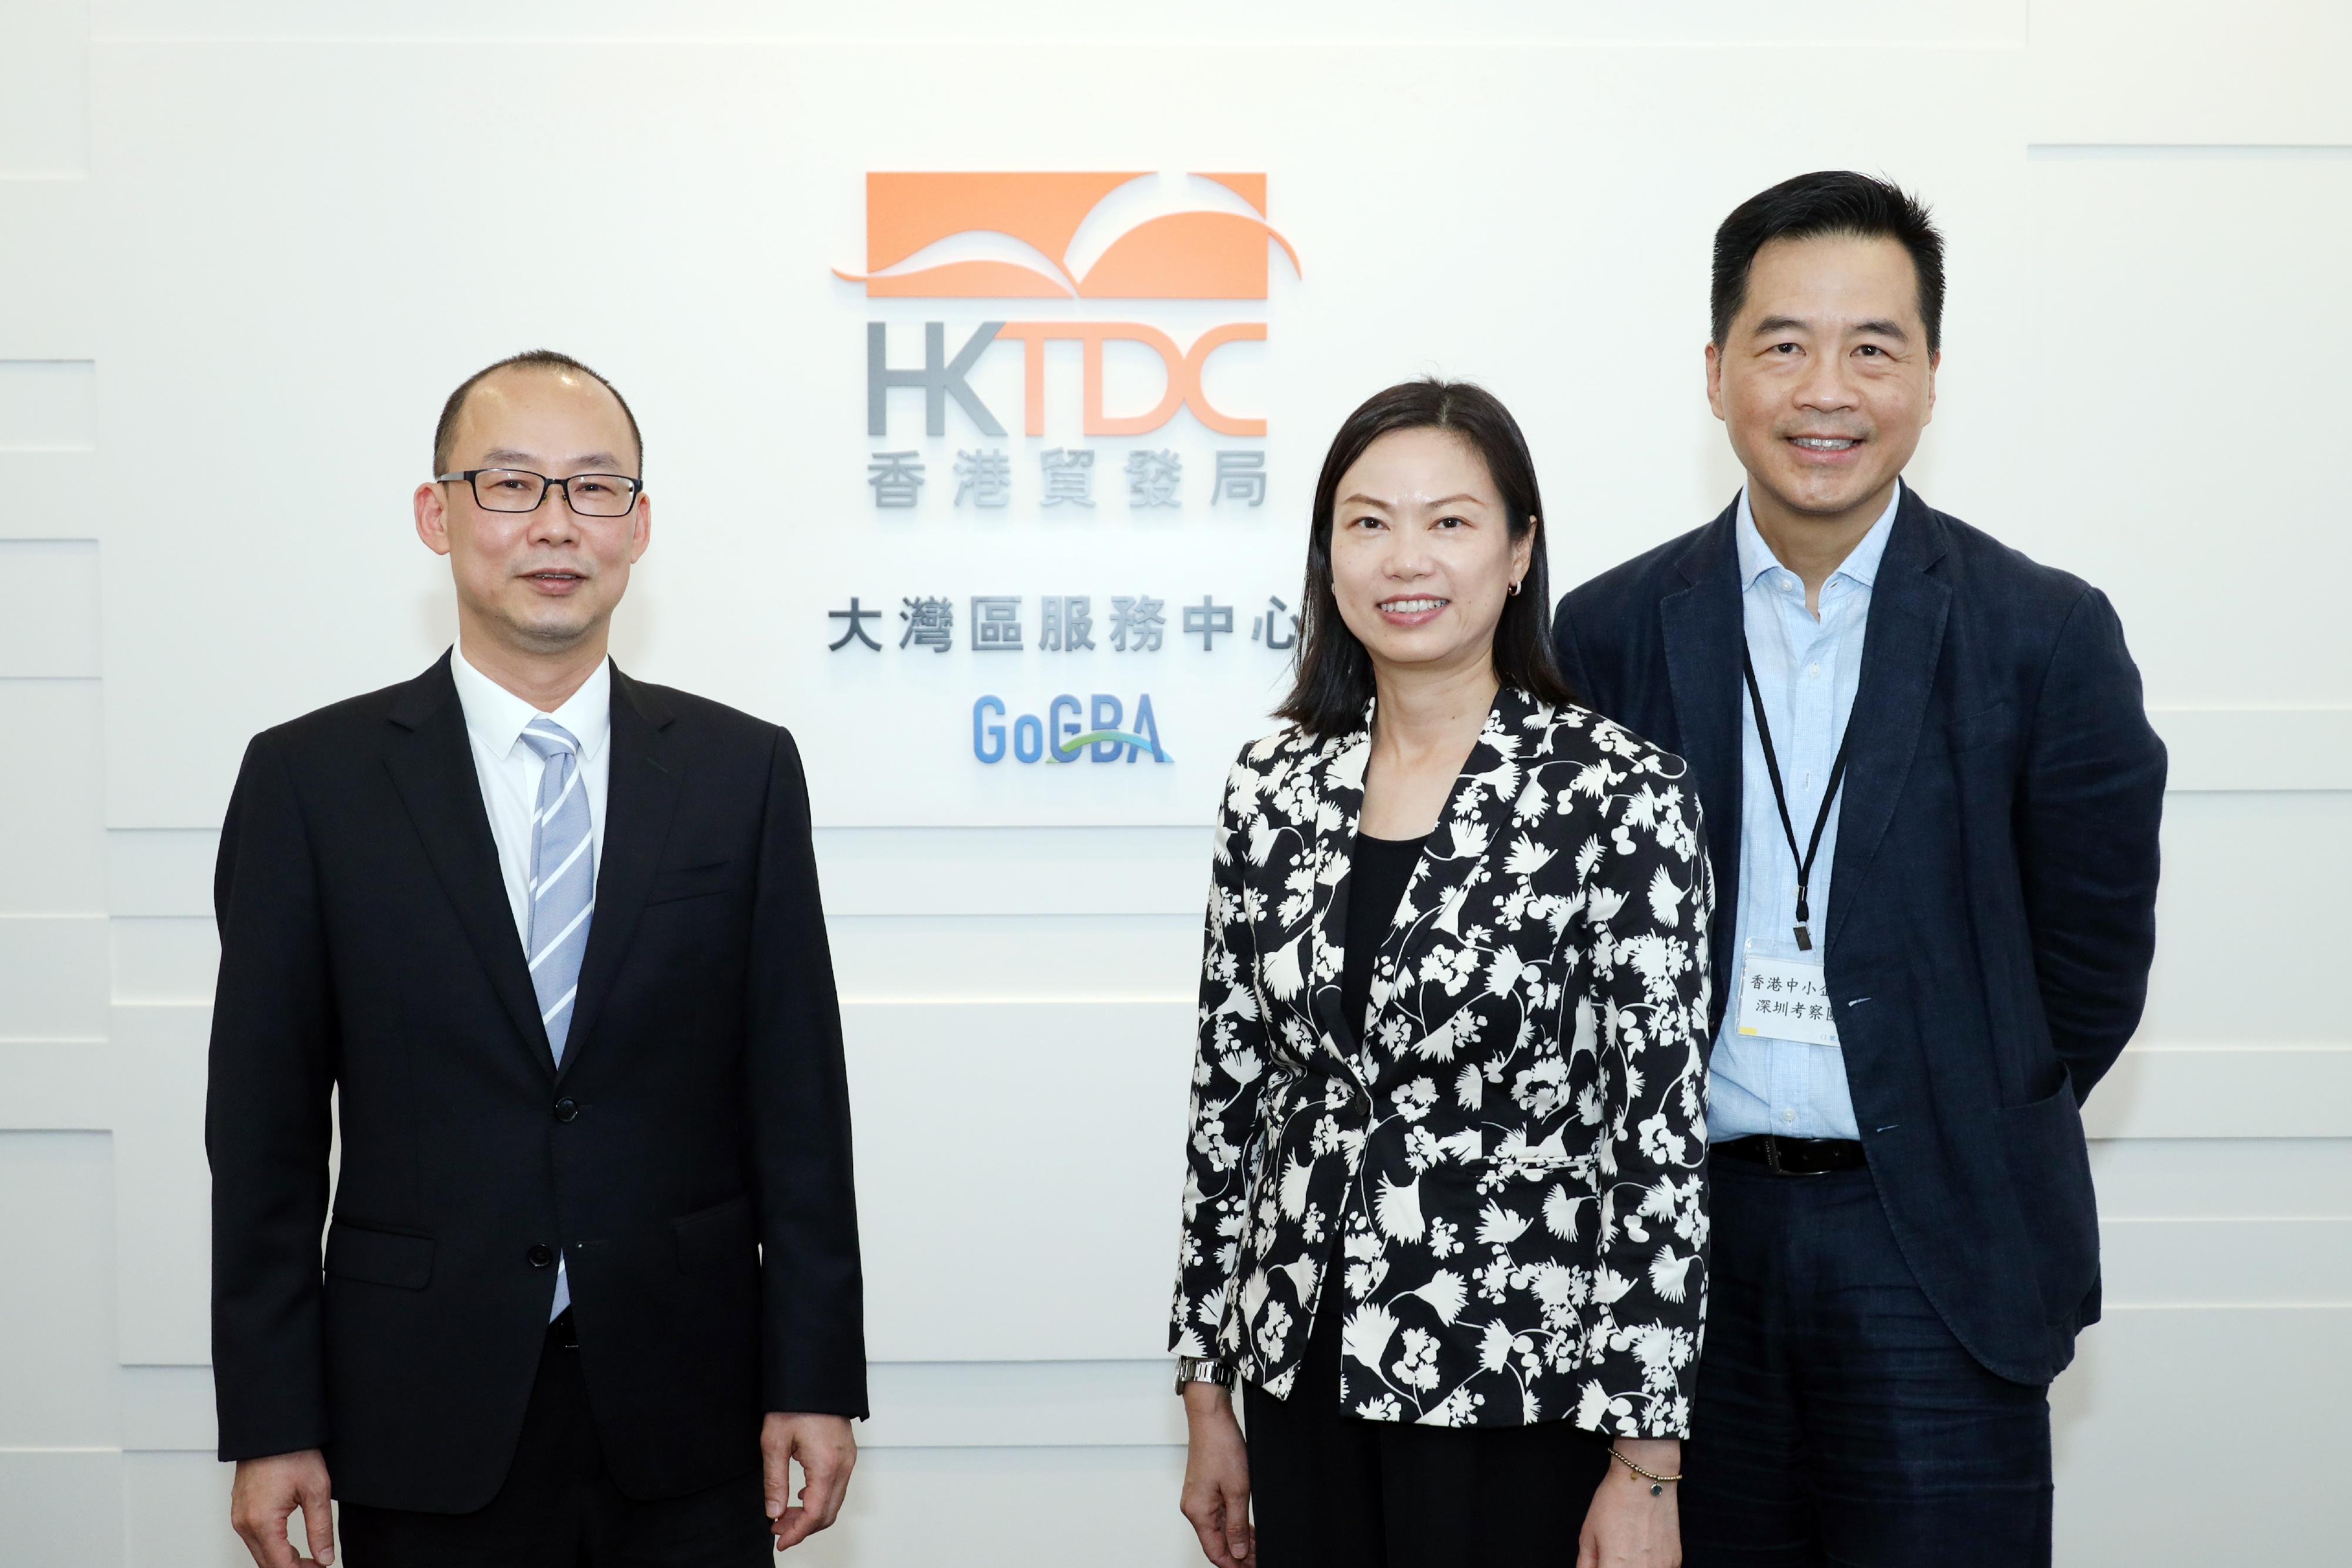 The Trade and Industry Department, the Small and Medium Enterprises Committee and the Shenzhen Liaison Unit of the Hong Kong Special Administrative Region Government led a Hong Kong small and medium enterprises  delegation to Shenzhen today (November 1). The delegation visited Hong Kong Trade Development Council GBA Support Centre in Shenzhen.
